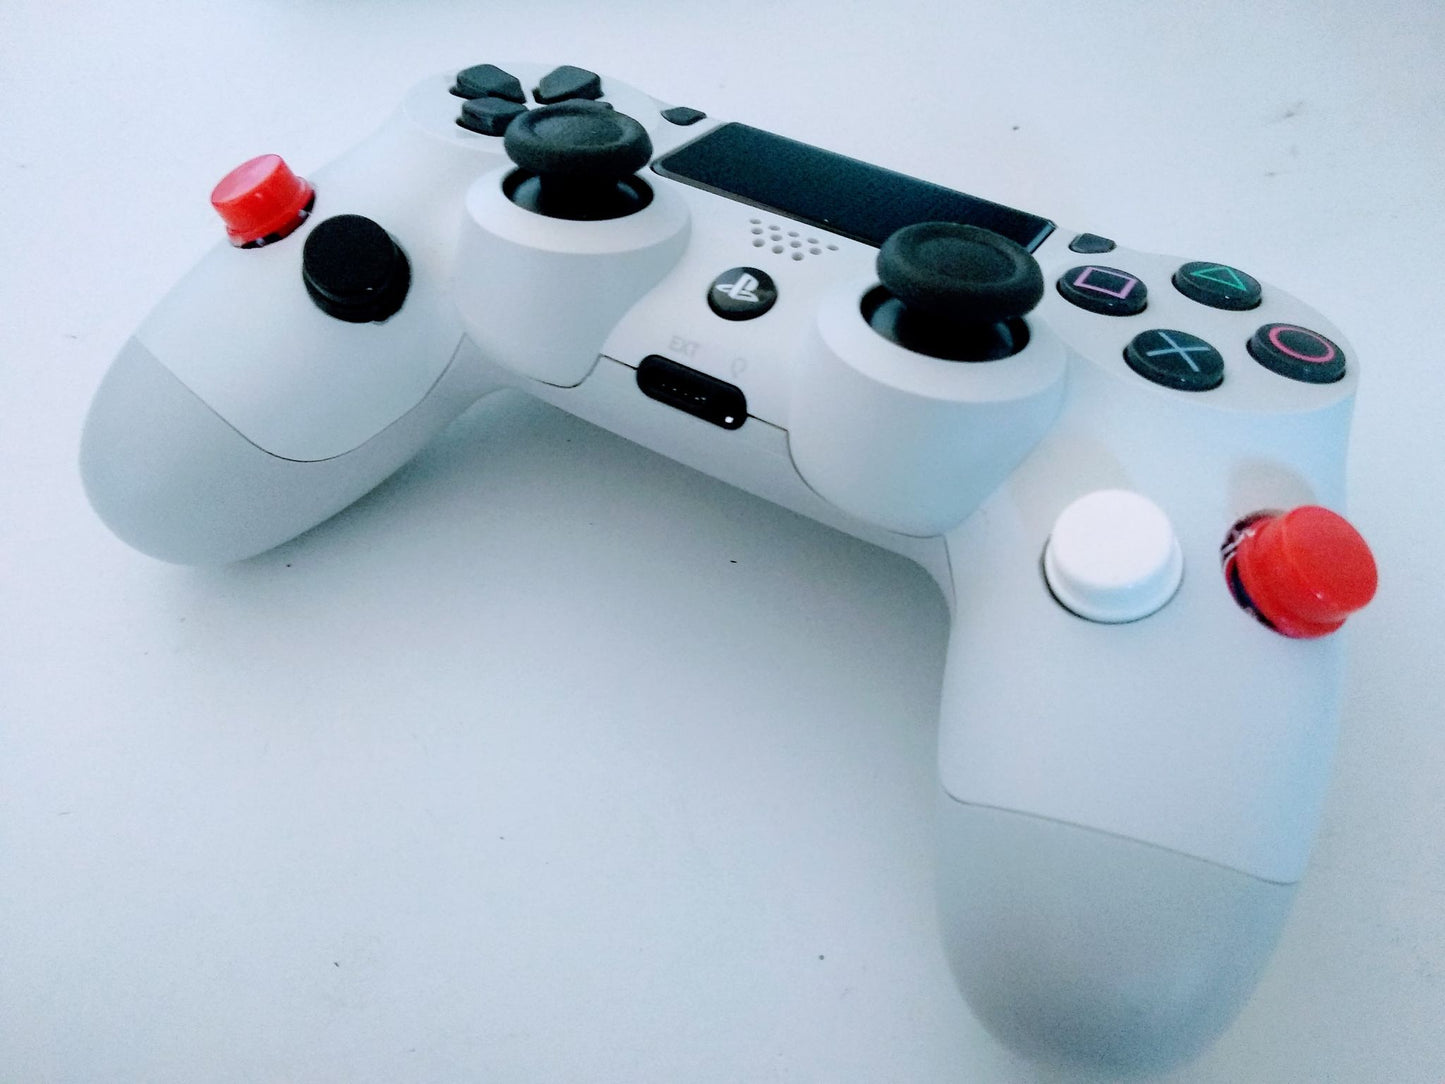 PS4 controller with triggers on it